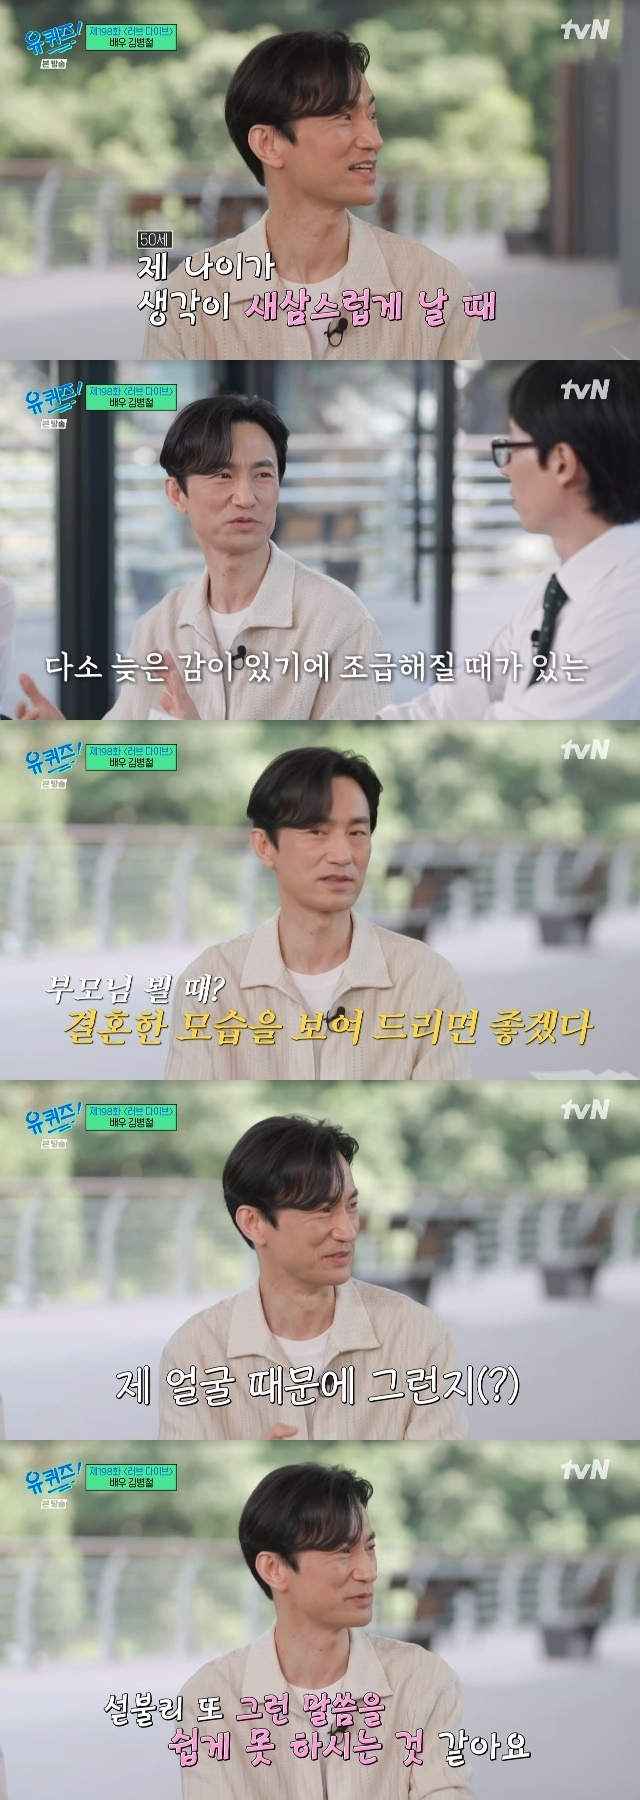 Kim Byeong-Cheol, who is still single, commented on the marriage.Actress Kim Byeong-Cheol appeared as a guest in the 198th Love Dive special episode of tvN entertainment show You Quiz on the Block (hereinafter referred to as You Quiz on the Block) aired on June 14.Kim Byeong-Cheol, who has been living obscurity for 10 years, said, I lived in my parents house, so I was able to reduce the rent burden and earned pocket money for Alba.One of the things I did with Alvaro was an elementary school after-school play classroom teacher.However, Kim Byeong-Cheol said, I ended the class (I) and came out. I had a play class to bring out spontaneity, but vice-principal Sensei thought that the children were just playing and got rid of the class.When Kim Byeong-Cheol asked if he had done Thought to quit, he said, I did such a Thought. After school, Sensei thought about what Sensei would do.Ive worked as a stage manager, he said.Kim Byeong-Cheol bought shaving foam at the request of the actor at that time, but it turned out that it was shaving gel, and it caught the eye by telling the dizzying experience that the mistake occurred on the stage.Kim Byeong-Cheol said, I didnt see any aspect of it on purpose. I didnt make good money and didnt get married, but I didnt see this point consciously.I have already spent a lot of time and effort on what I have already done to think of another way, and I think there is something I can do in it, so I was able to continue even if I was shaken to achieve it. Later, when asked about his ideal type, he said, He is a man who works hard and wise. Im a little lazy. He doesnt ask me to take a step back when I fight, but he can take me back.He then said of Thought that he wanted to get married, Not sometimes, but quite often. When my age is when Thought is new, it is too late in time to make a home now.When I meet my parents, I sometimes think I want them to see me like that. When I meet a charming Reason, I am looking for it. He said, I can not do it again (I can not talk first), so I have to do something now.He said, I do not think I can talk about it because of my face. He asked viewers, If you see me, I would like you to pass by.